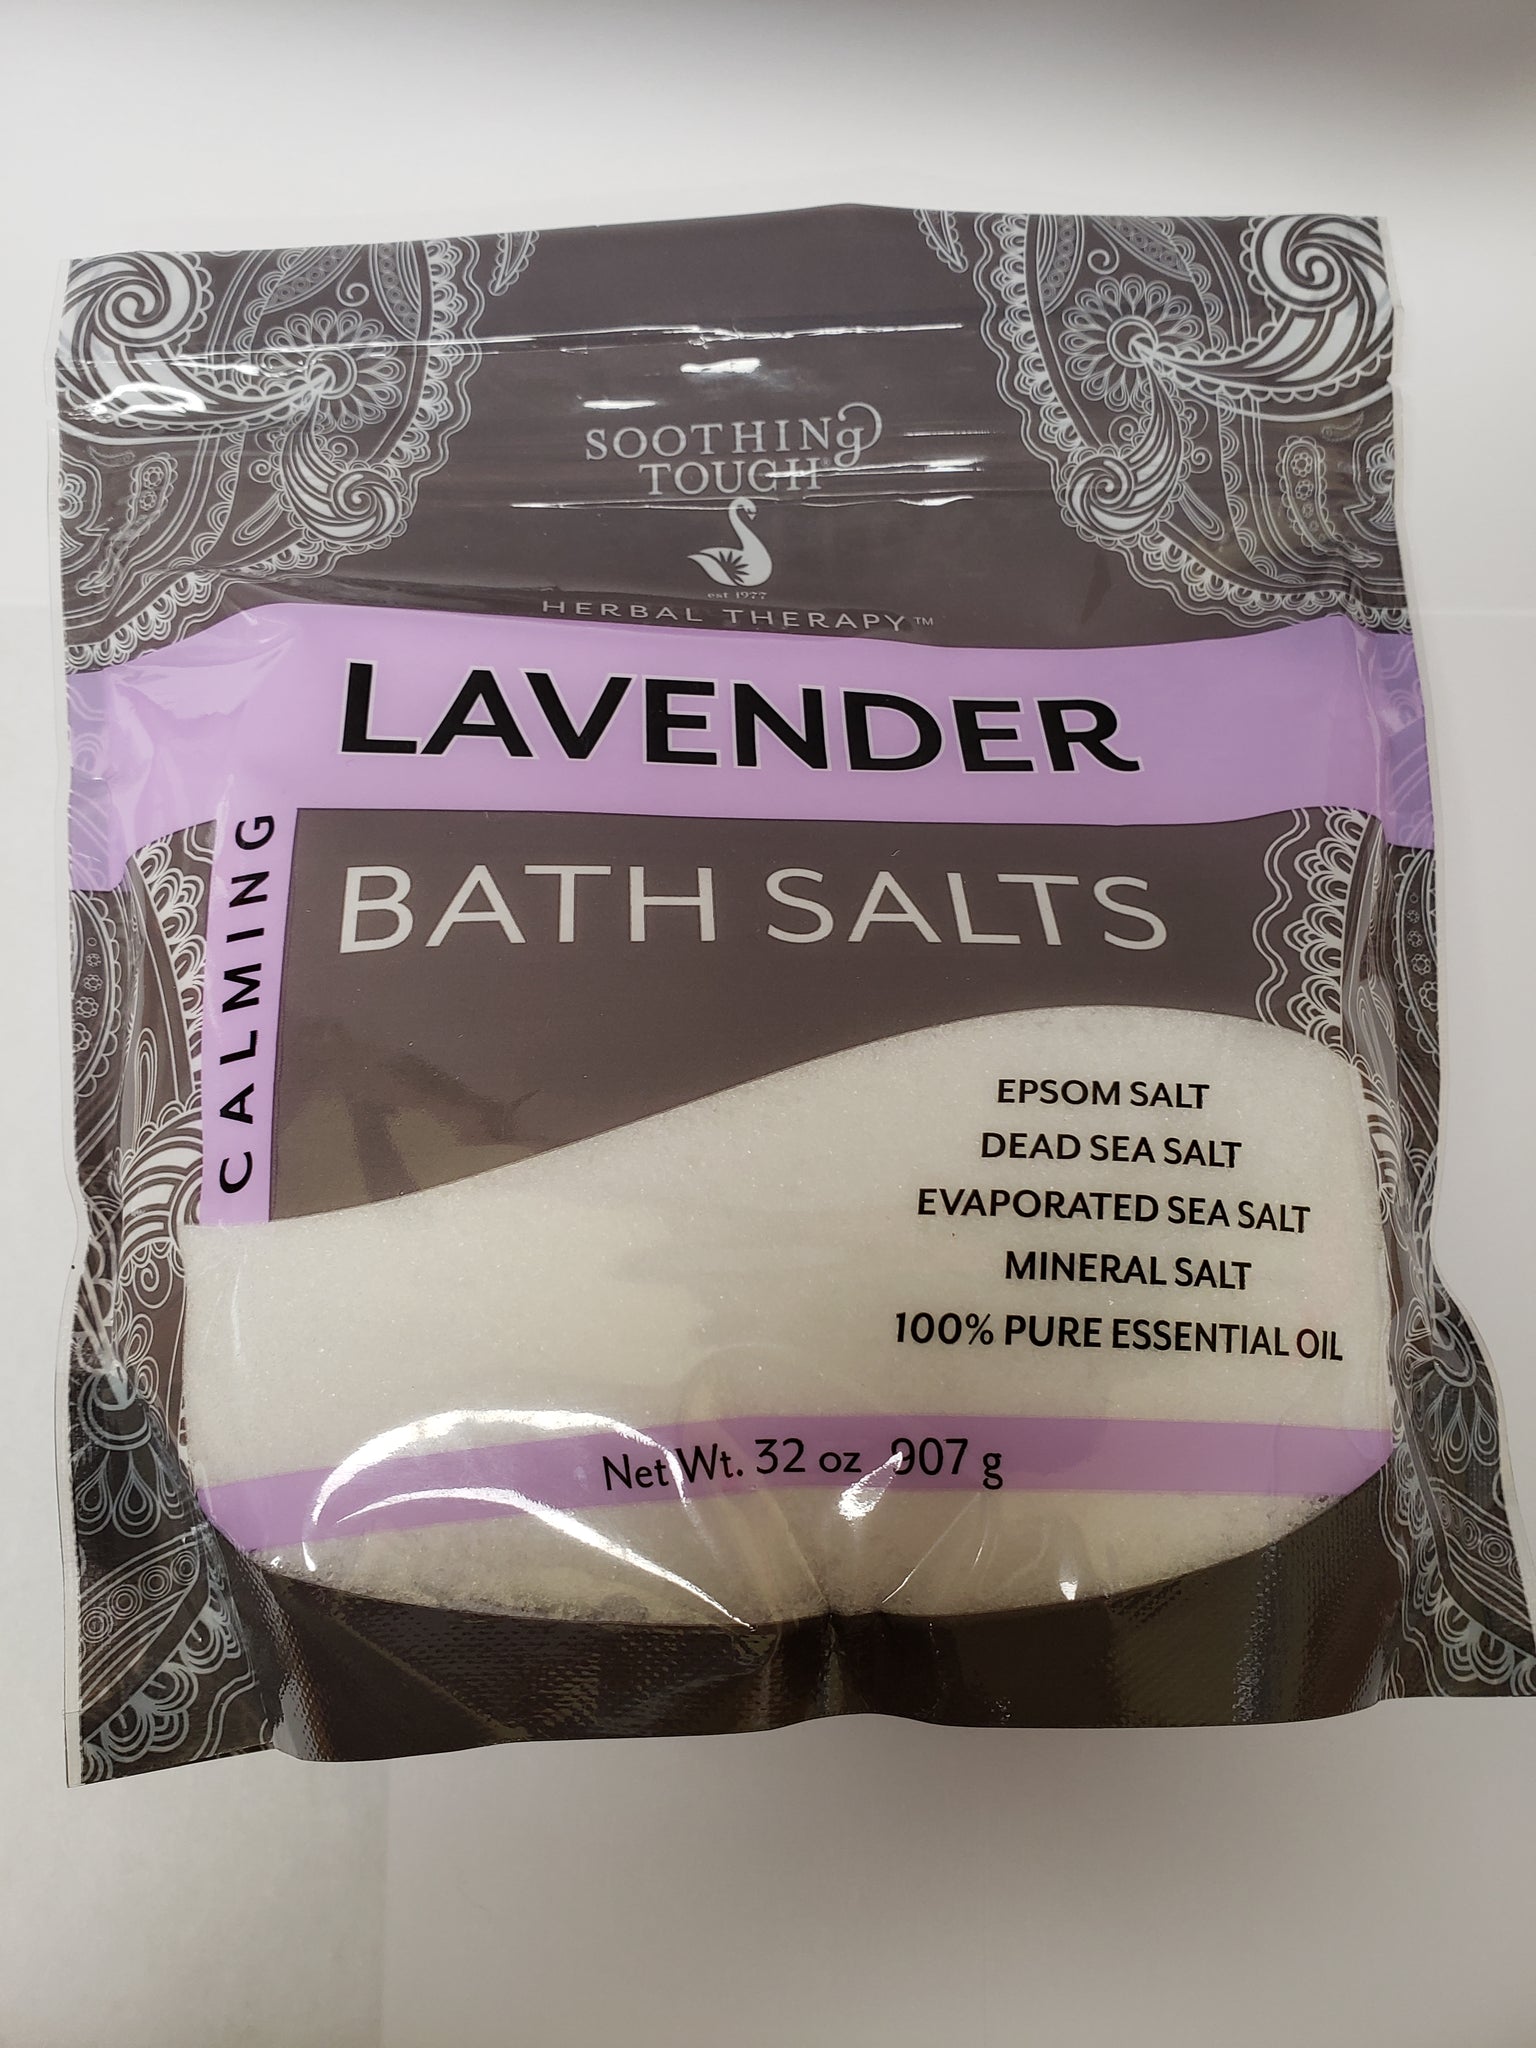 Soothing Touch Bath Salts - Lavender